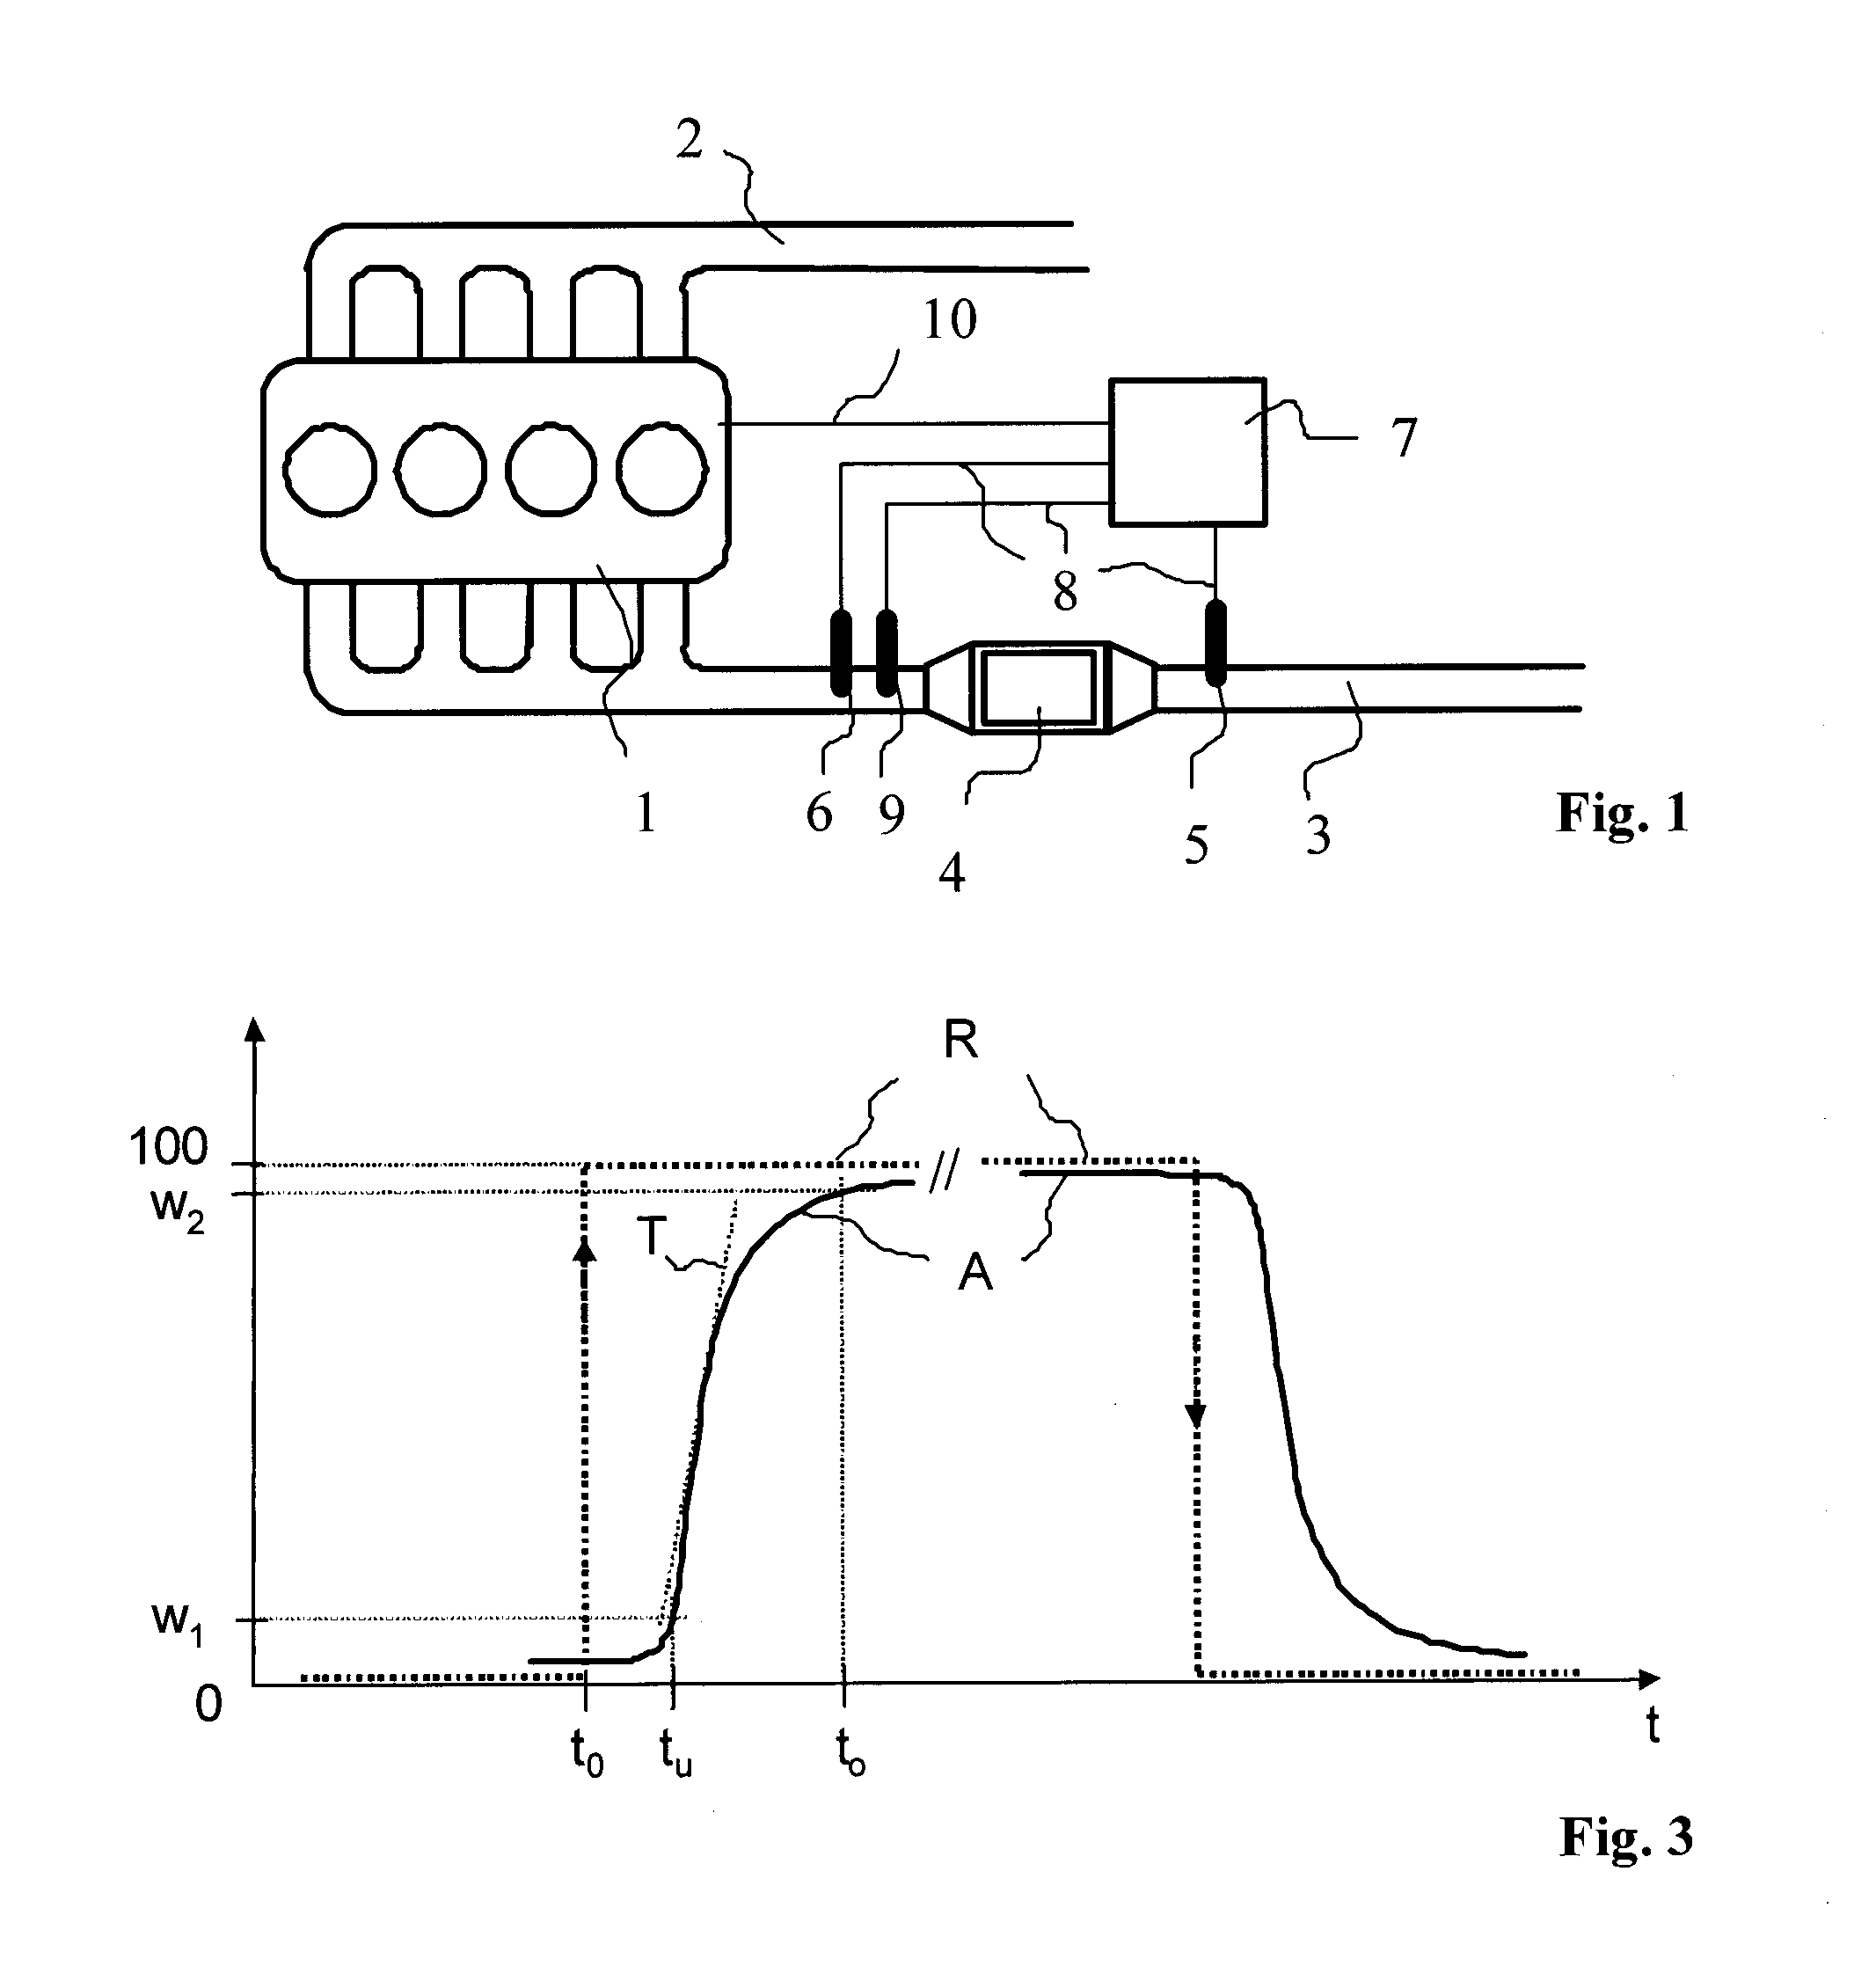 Method for Diagnosing an Exhaust Gas Catalytic Converter and/or an Exhaust Gas Sensor of a Motor Vehicle Internal Combustion Engine